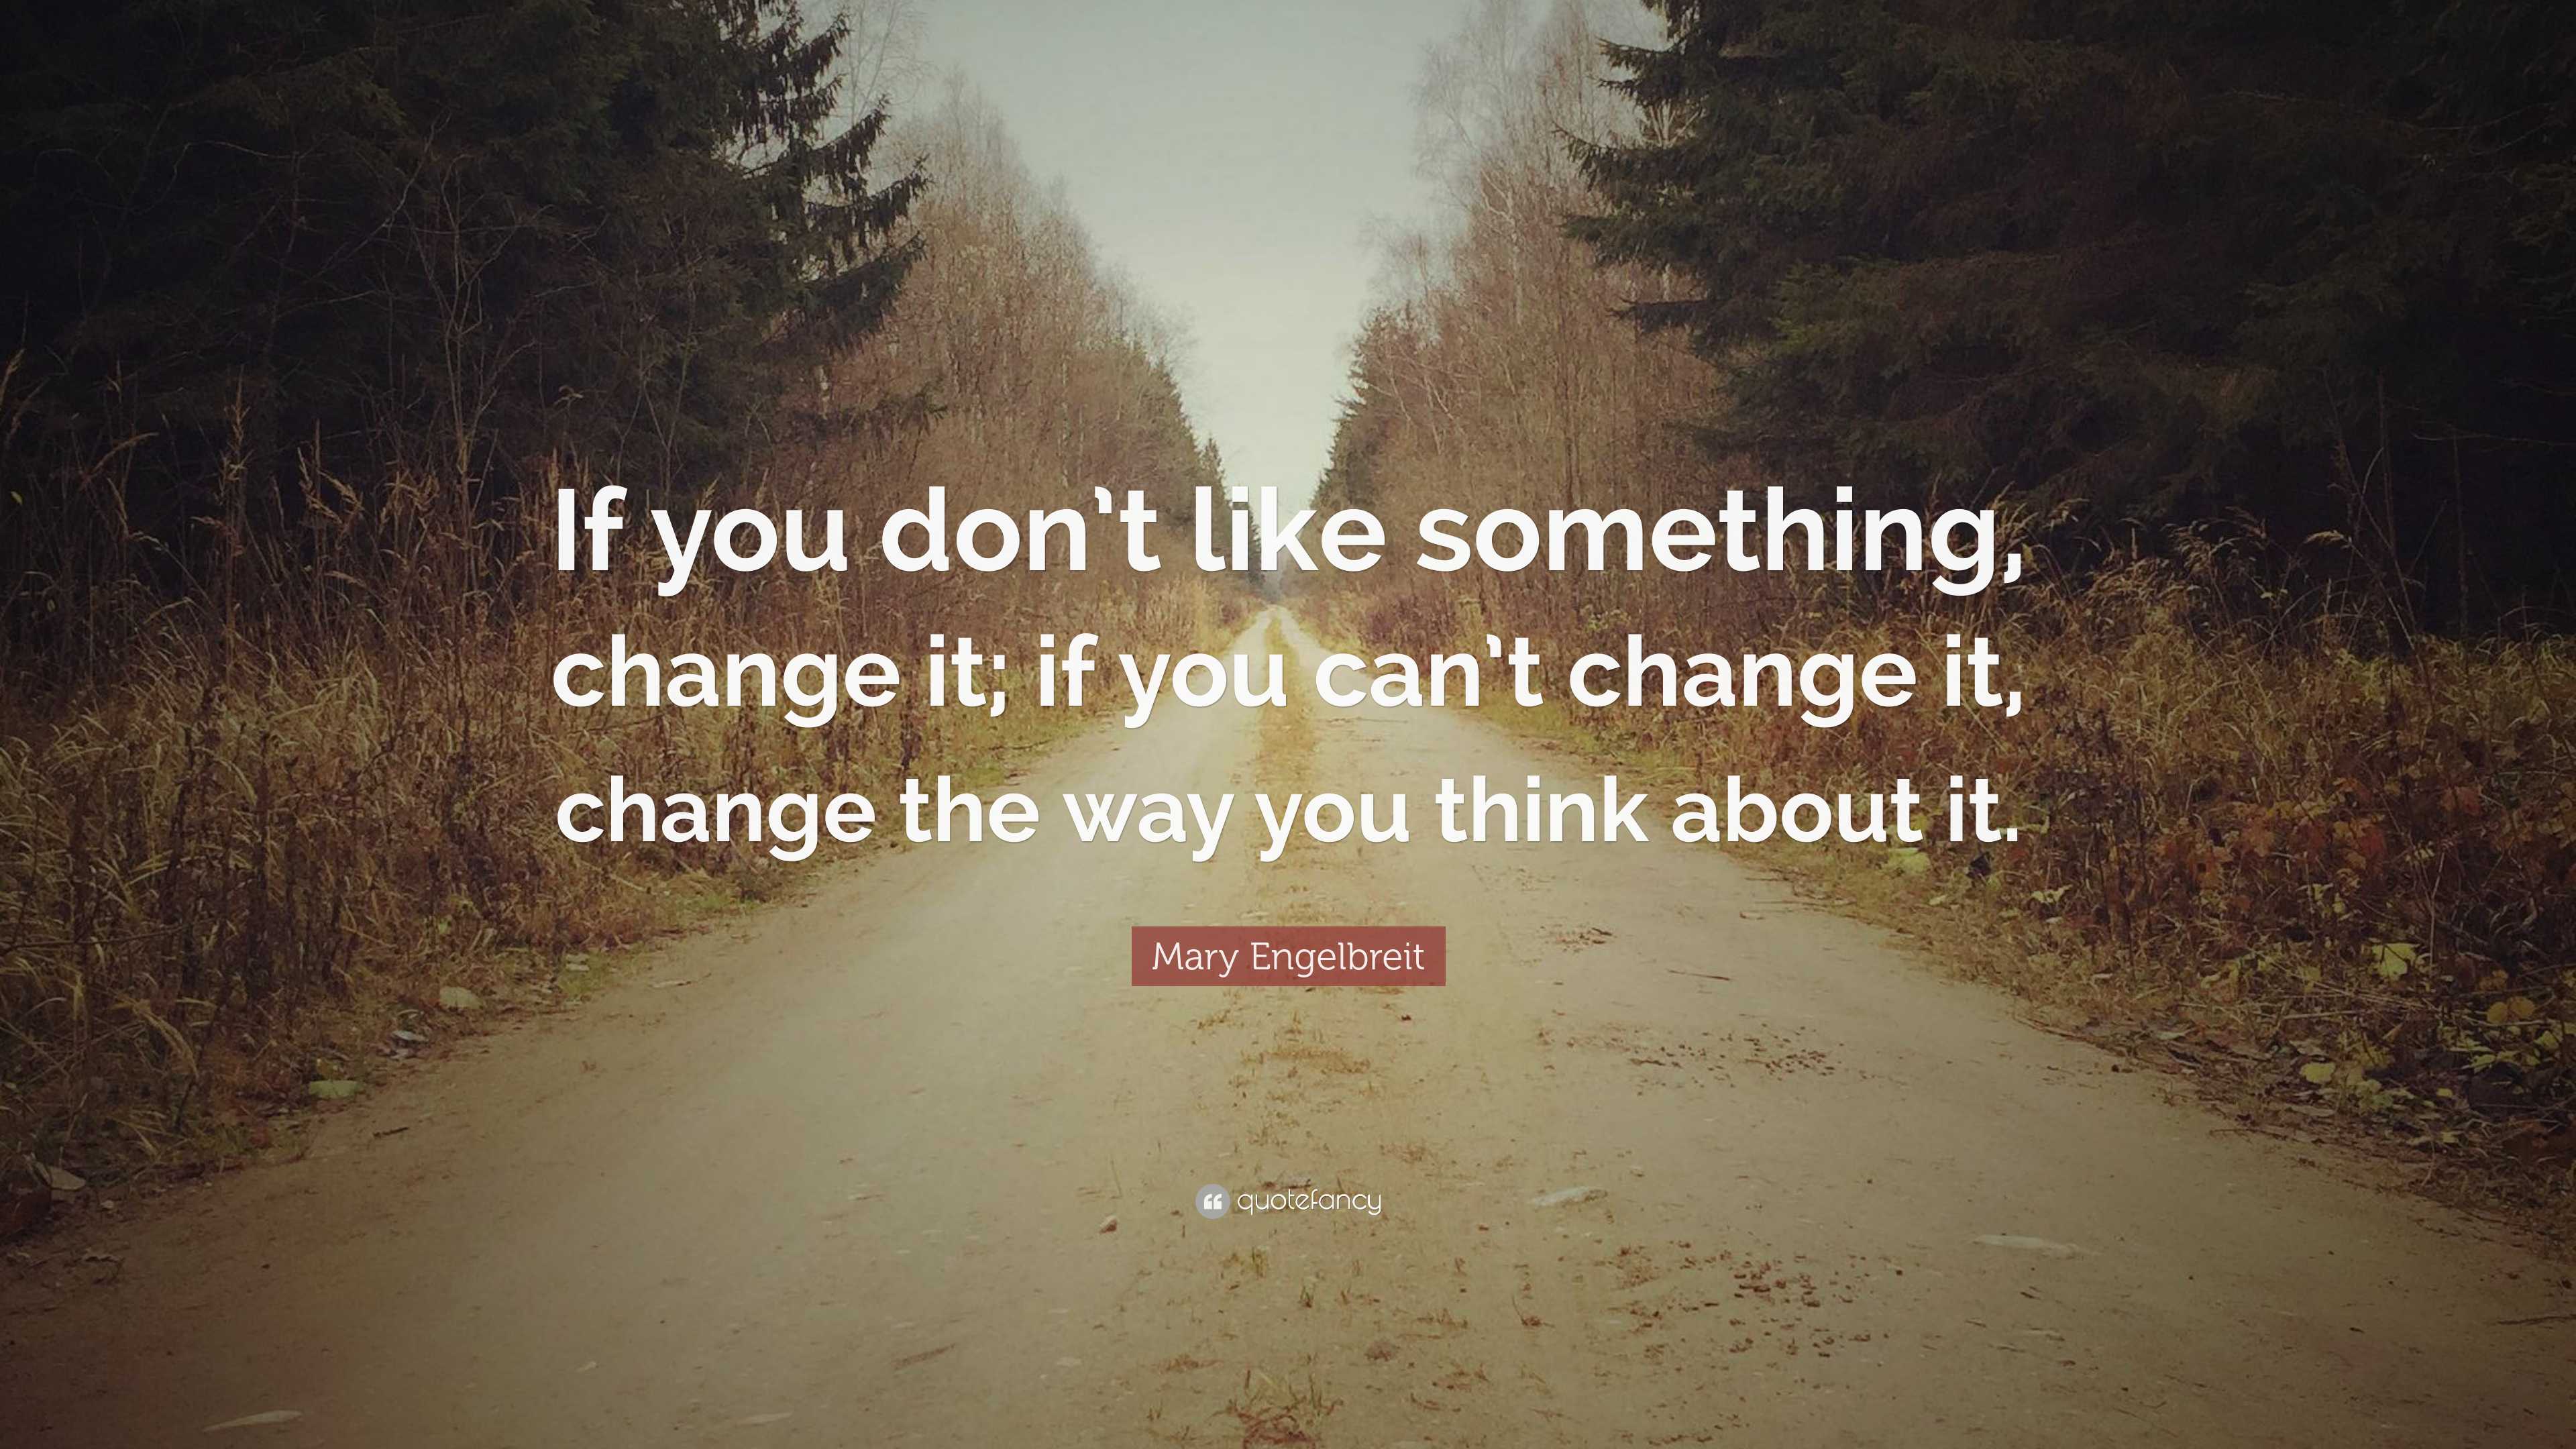 Mary Engelbreit Quote: “If you don’t like something, change it; if you ...